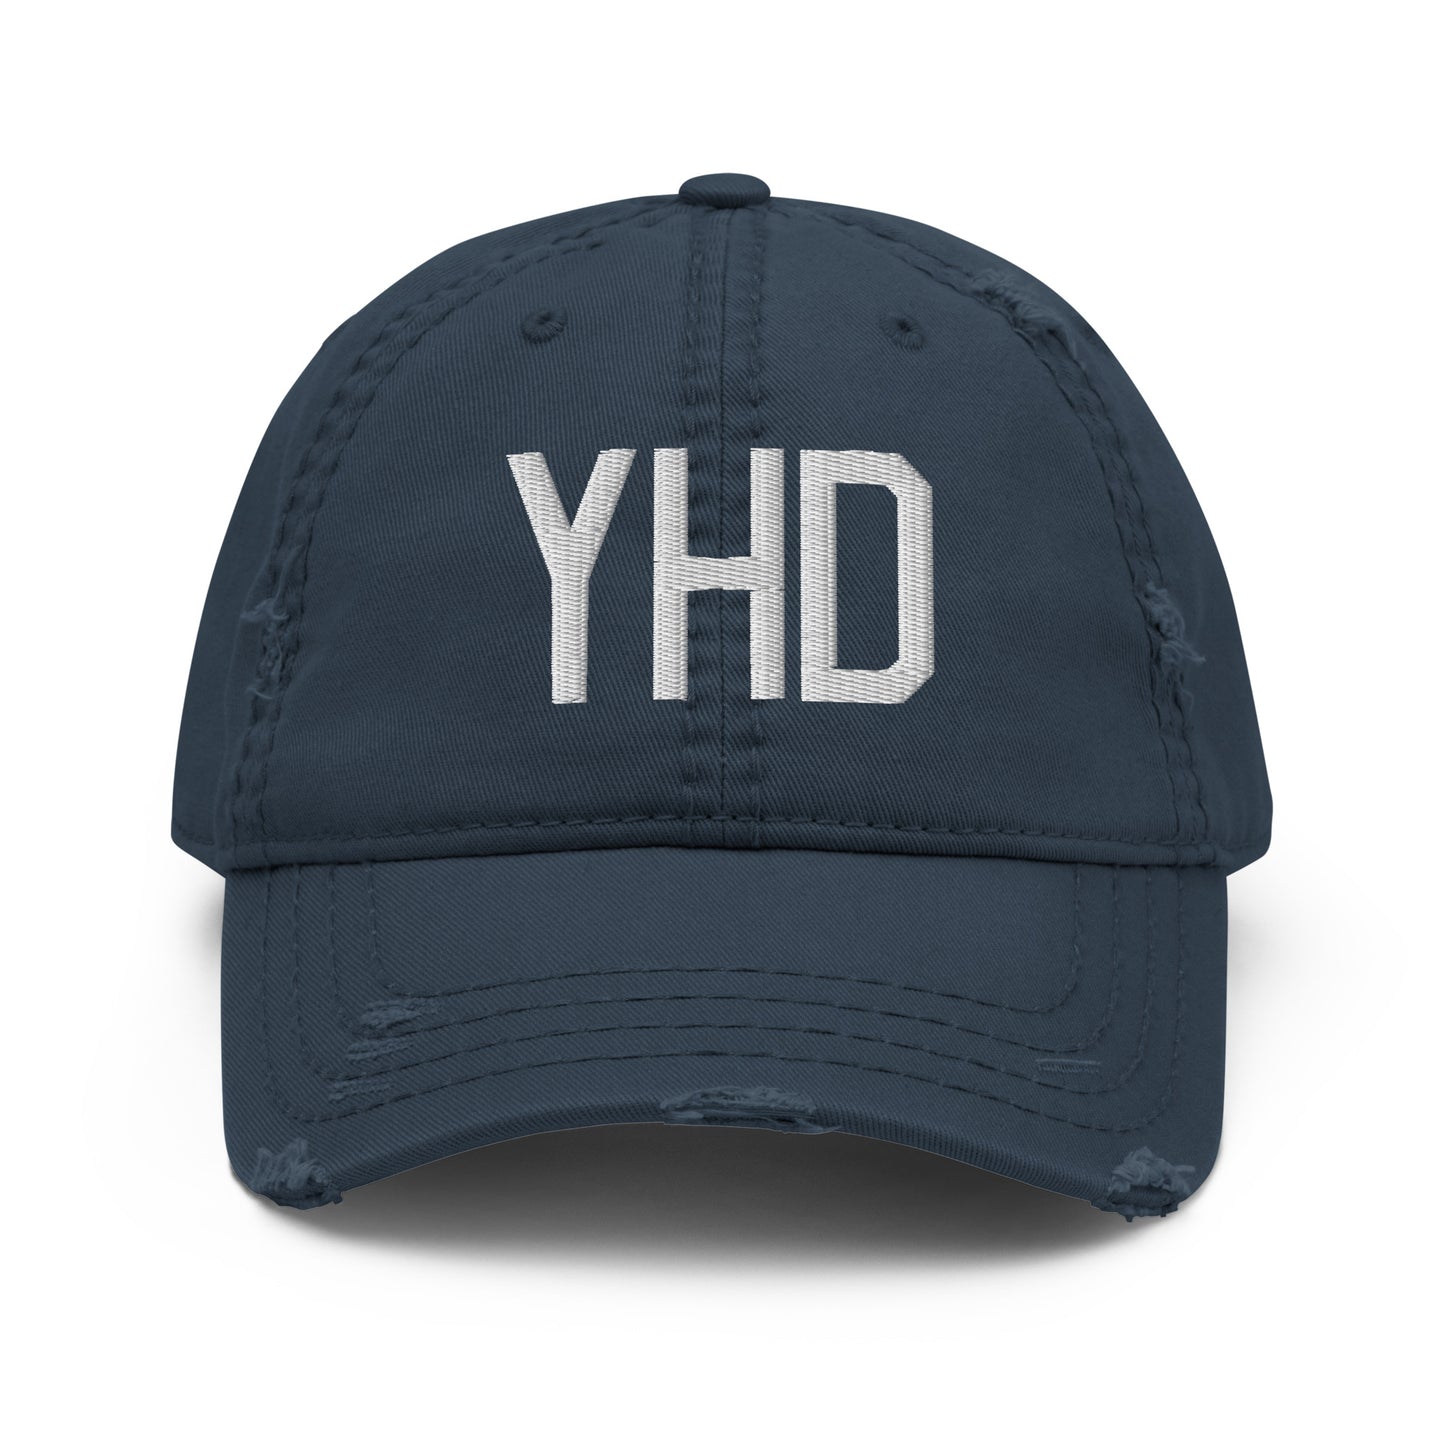 Airport Code Distressed Hat - White • YHD Dryden • YHM Designs - Image 13